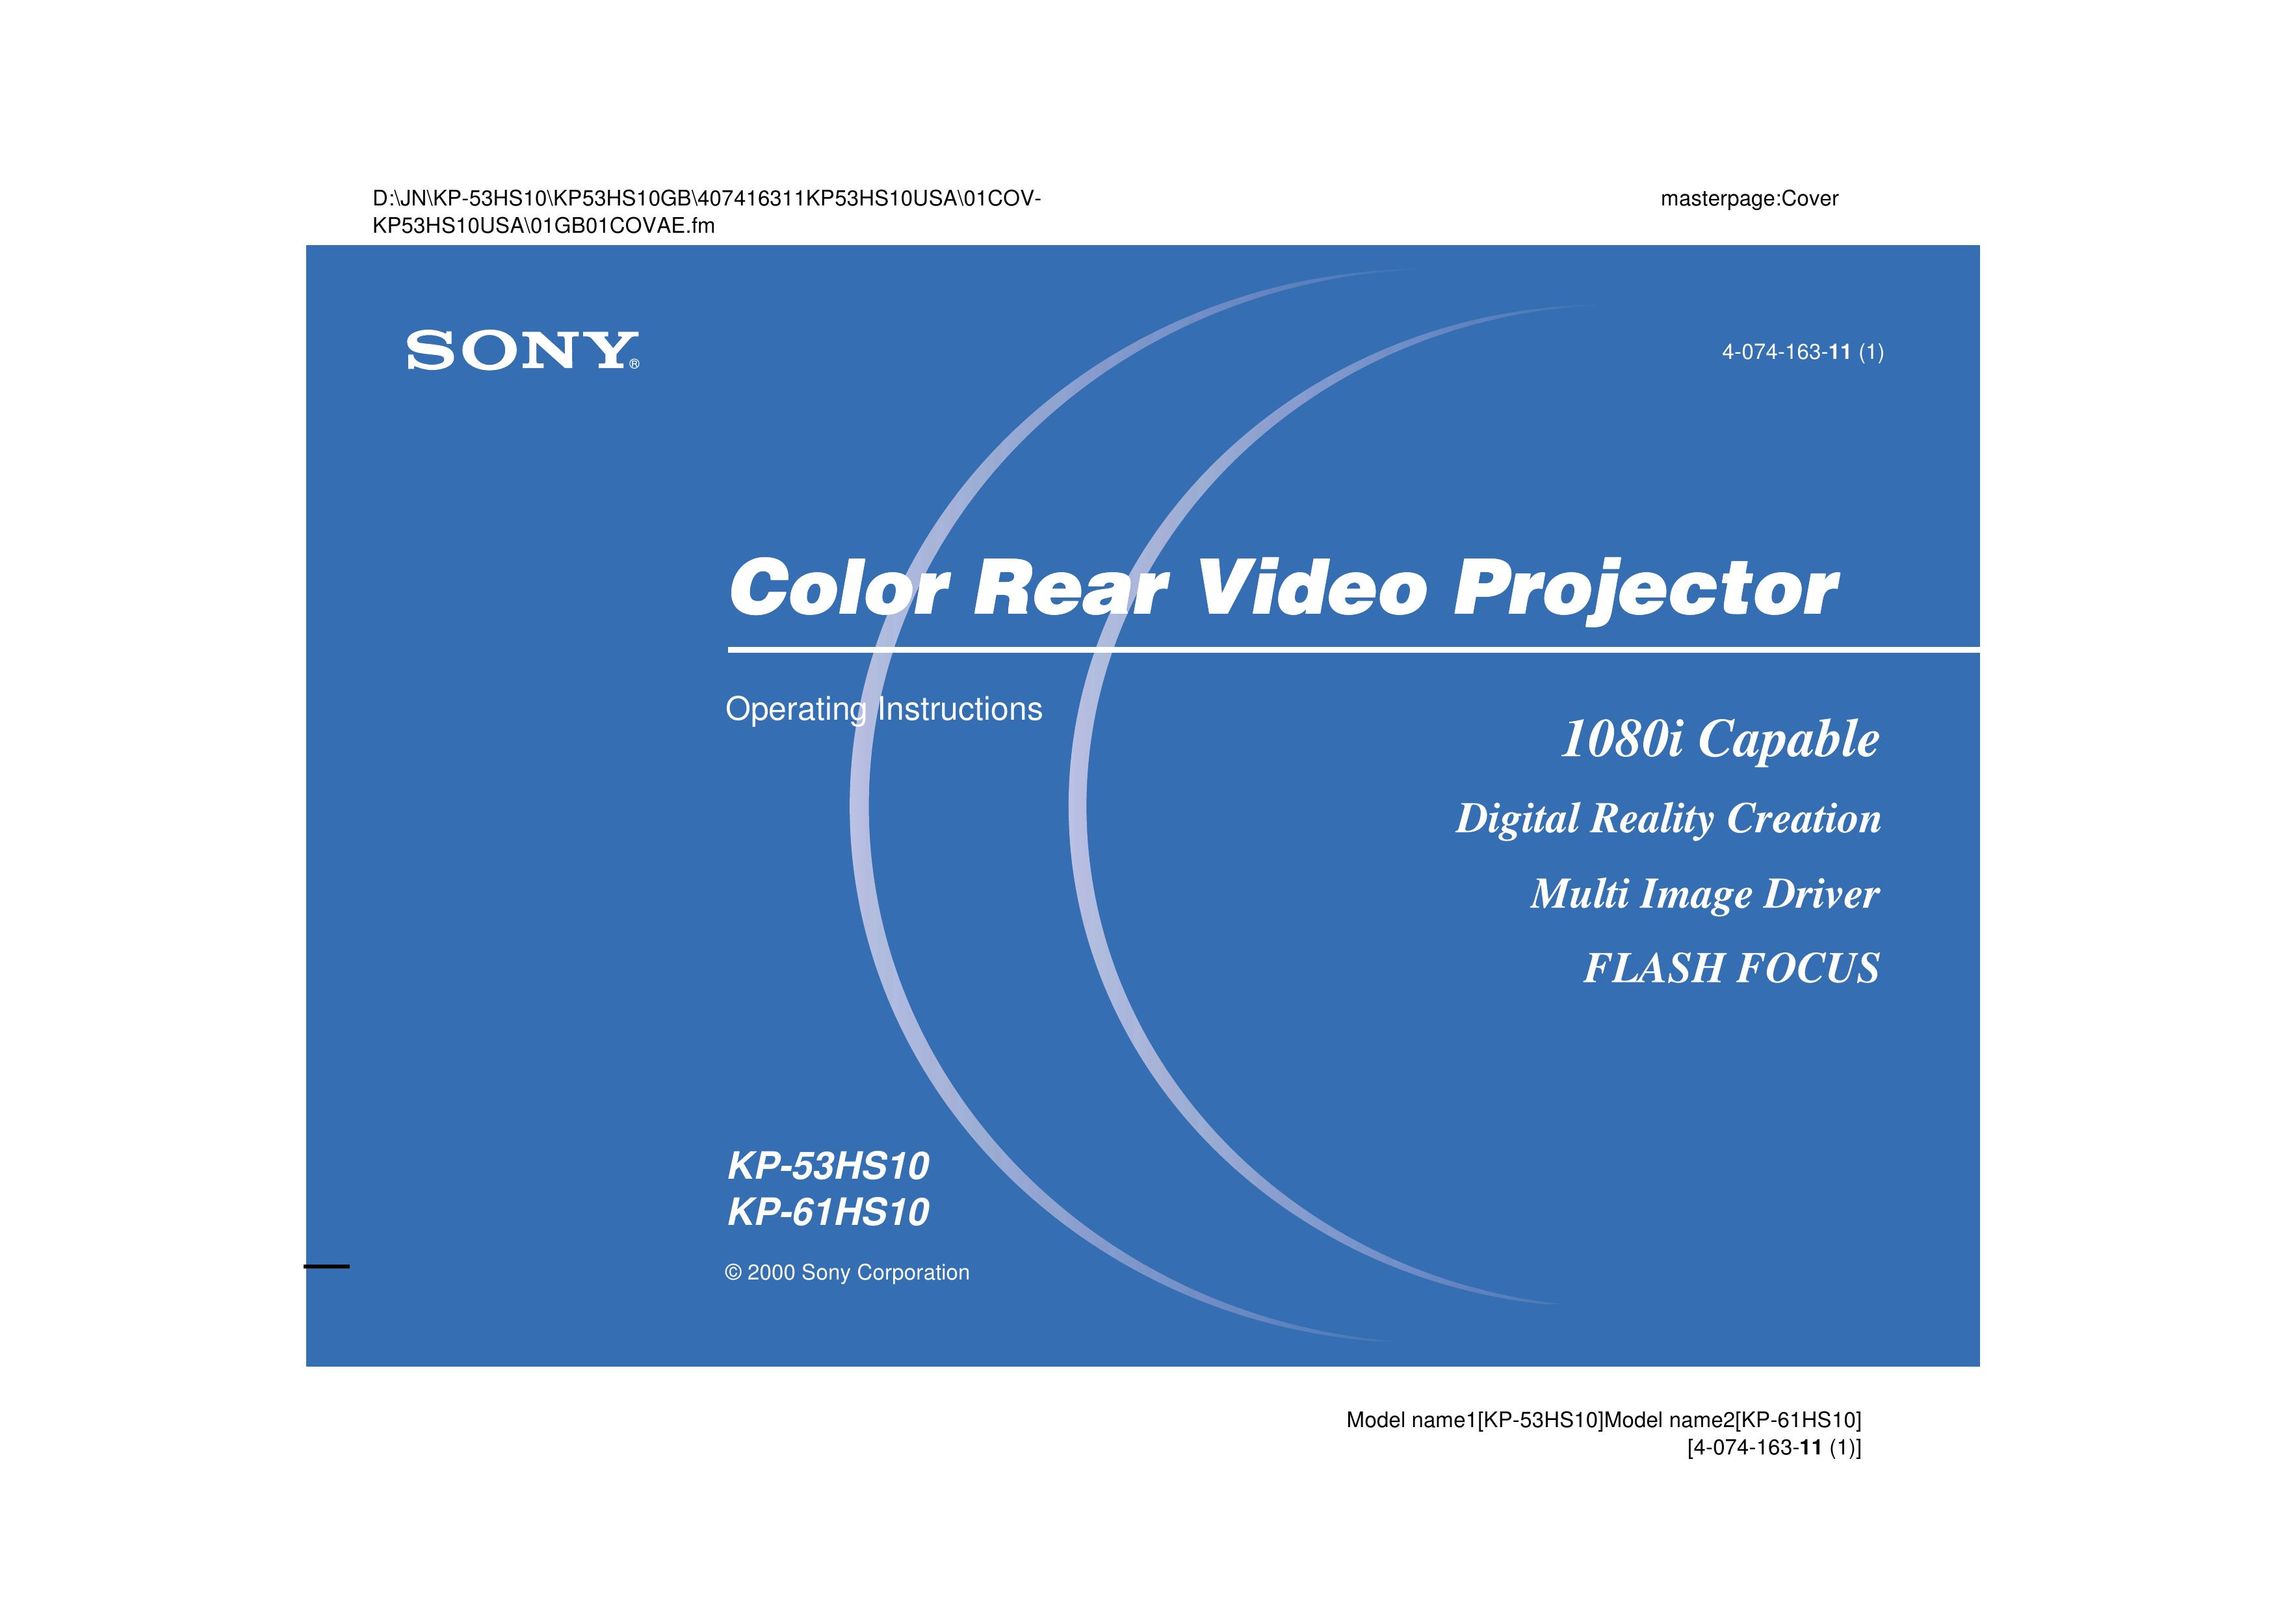 Sony KP-61HS10 Projector User Manual